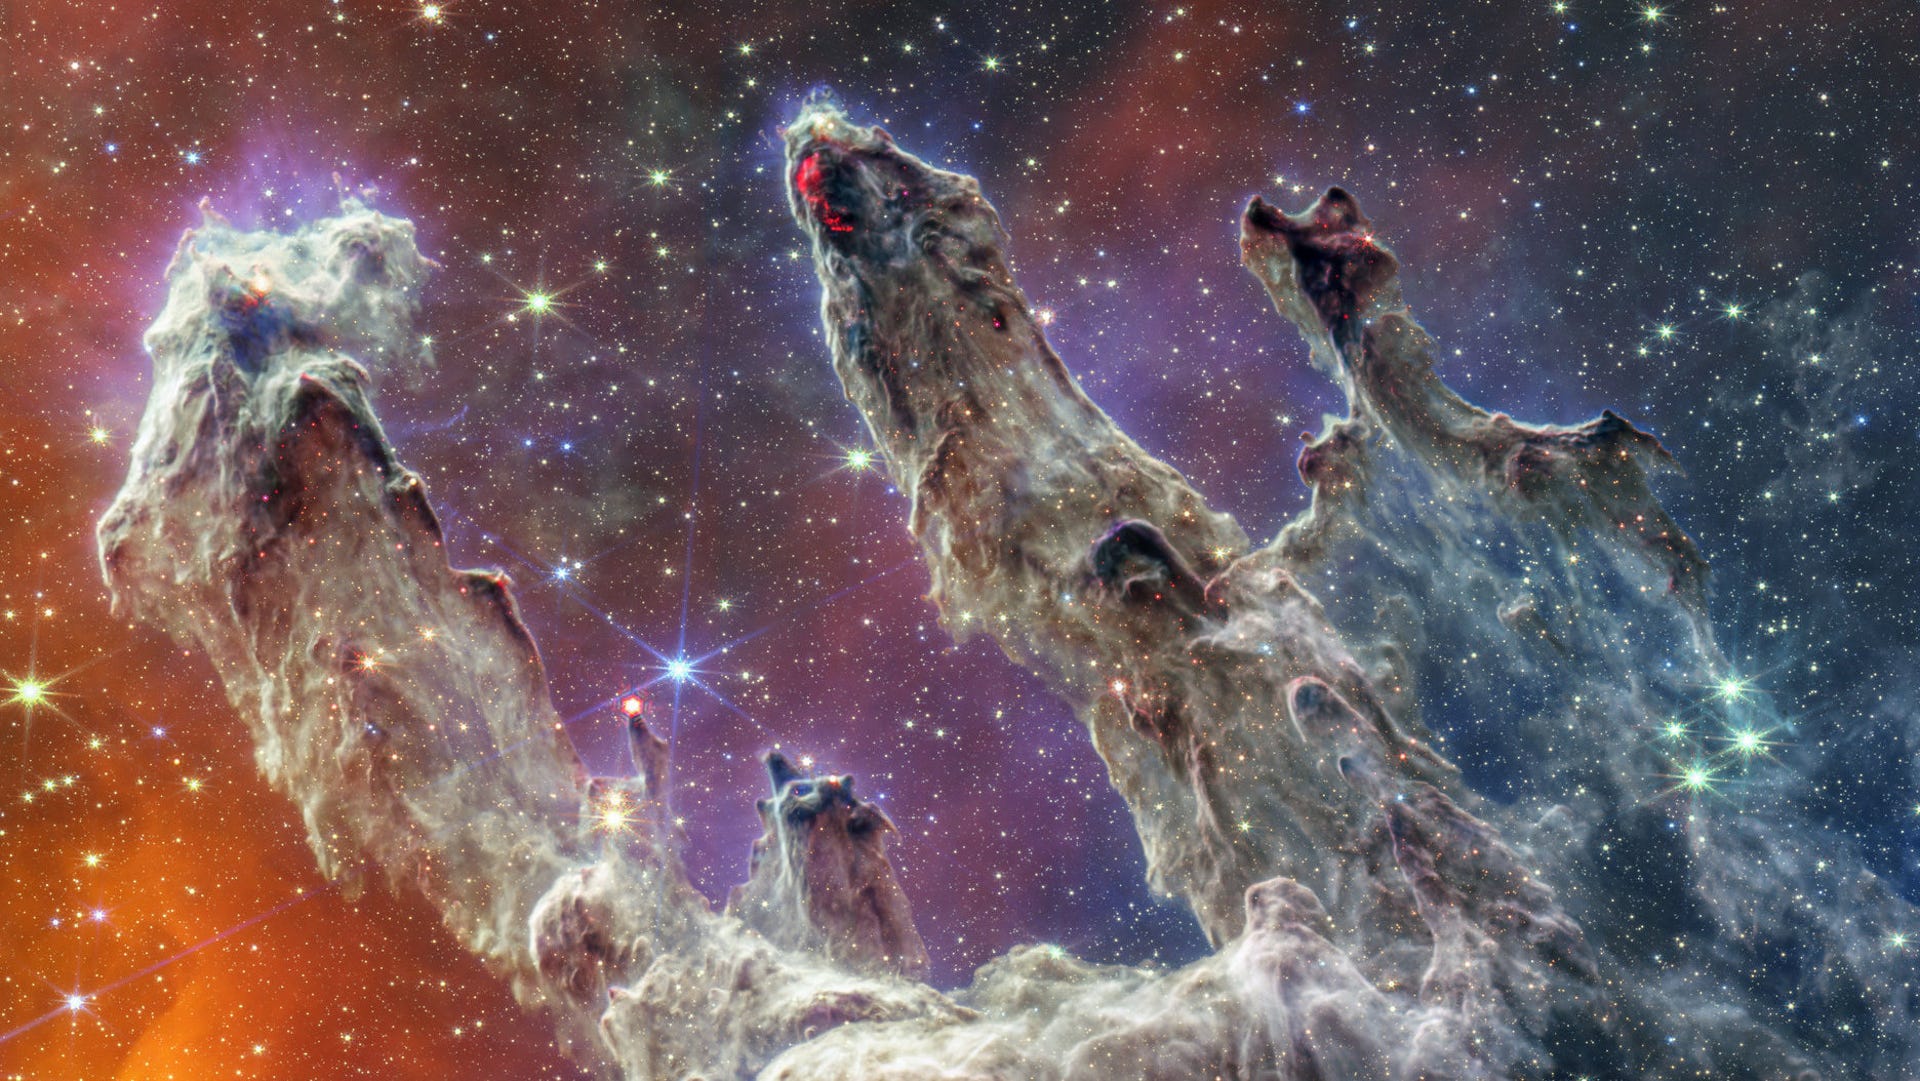 Colorful interstellar gas and dust form towering pillars in a star-forming region of space.